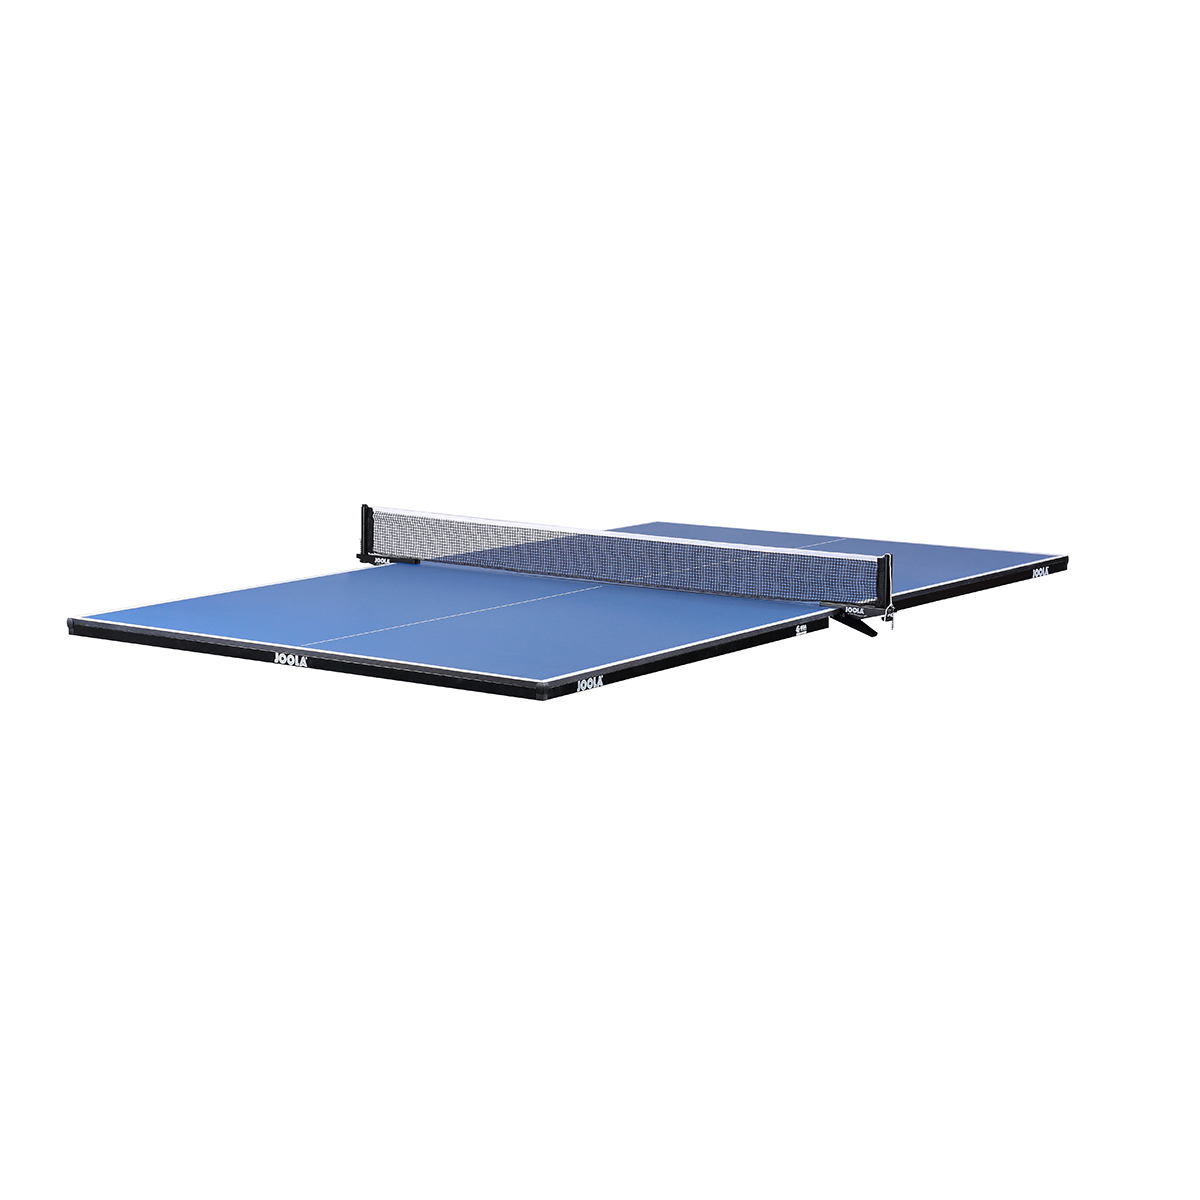 JOOLA CONVERSION TABLE TENNIS TOP WITH METAL APRON, FOAM BACKING AND NET SET